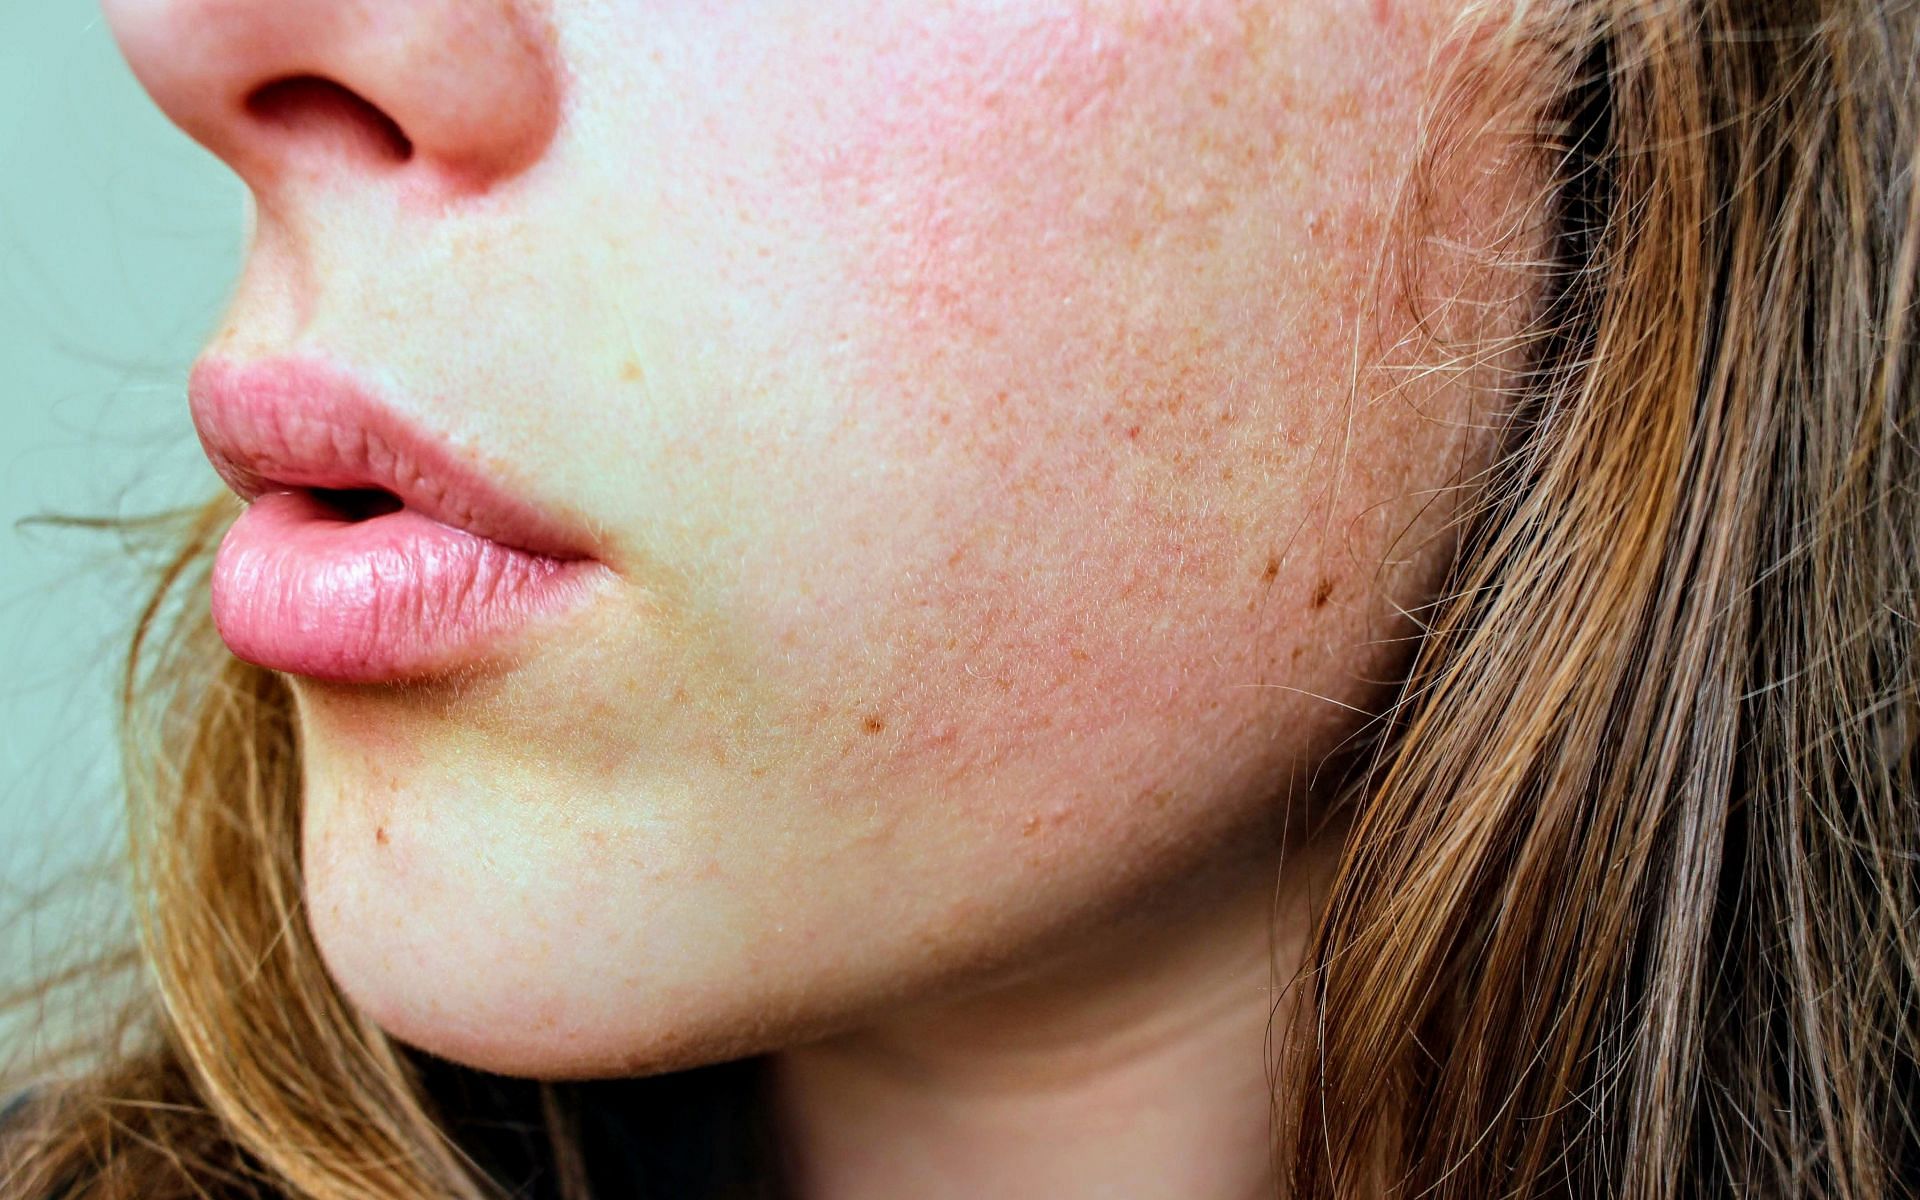 Dry and flaky skin is one of the most common indicators of dehydration (Image via Pexels @Jenna Hamra)